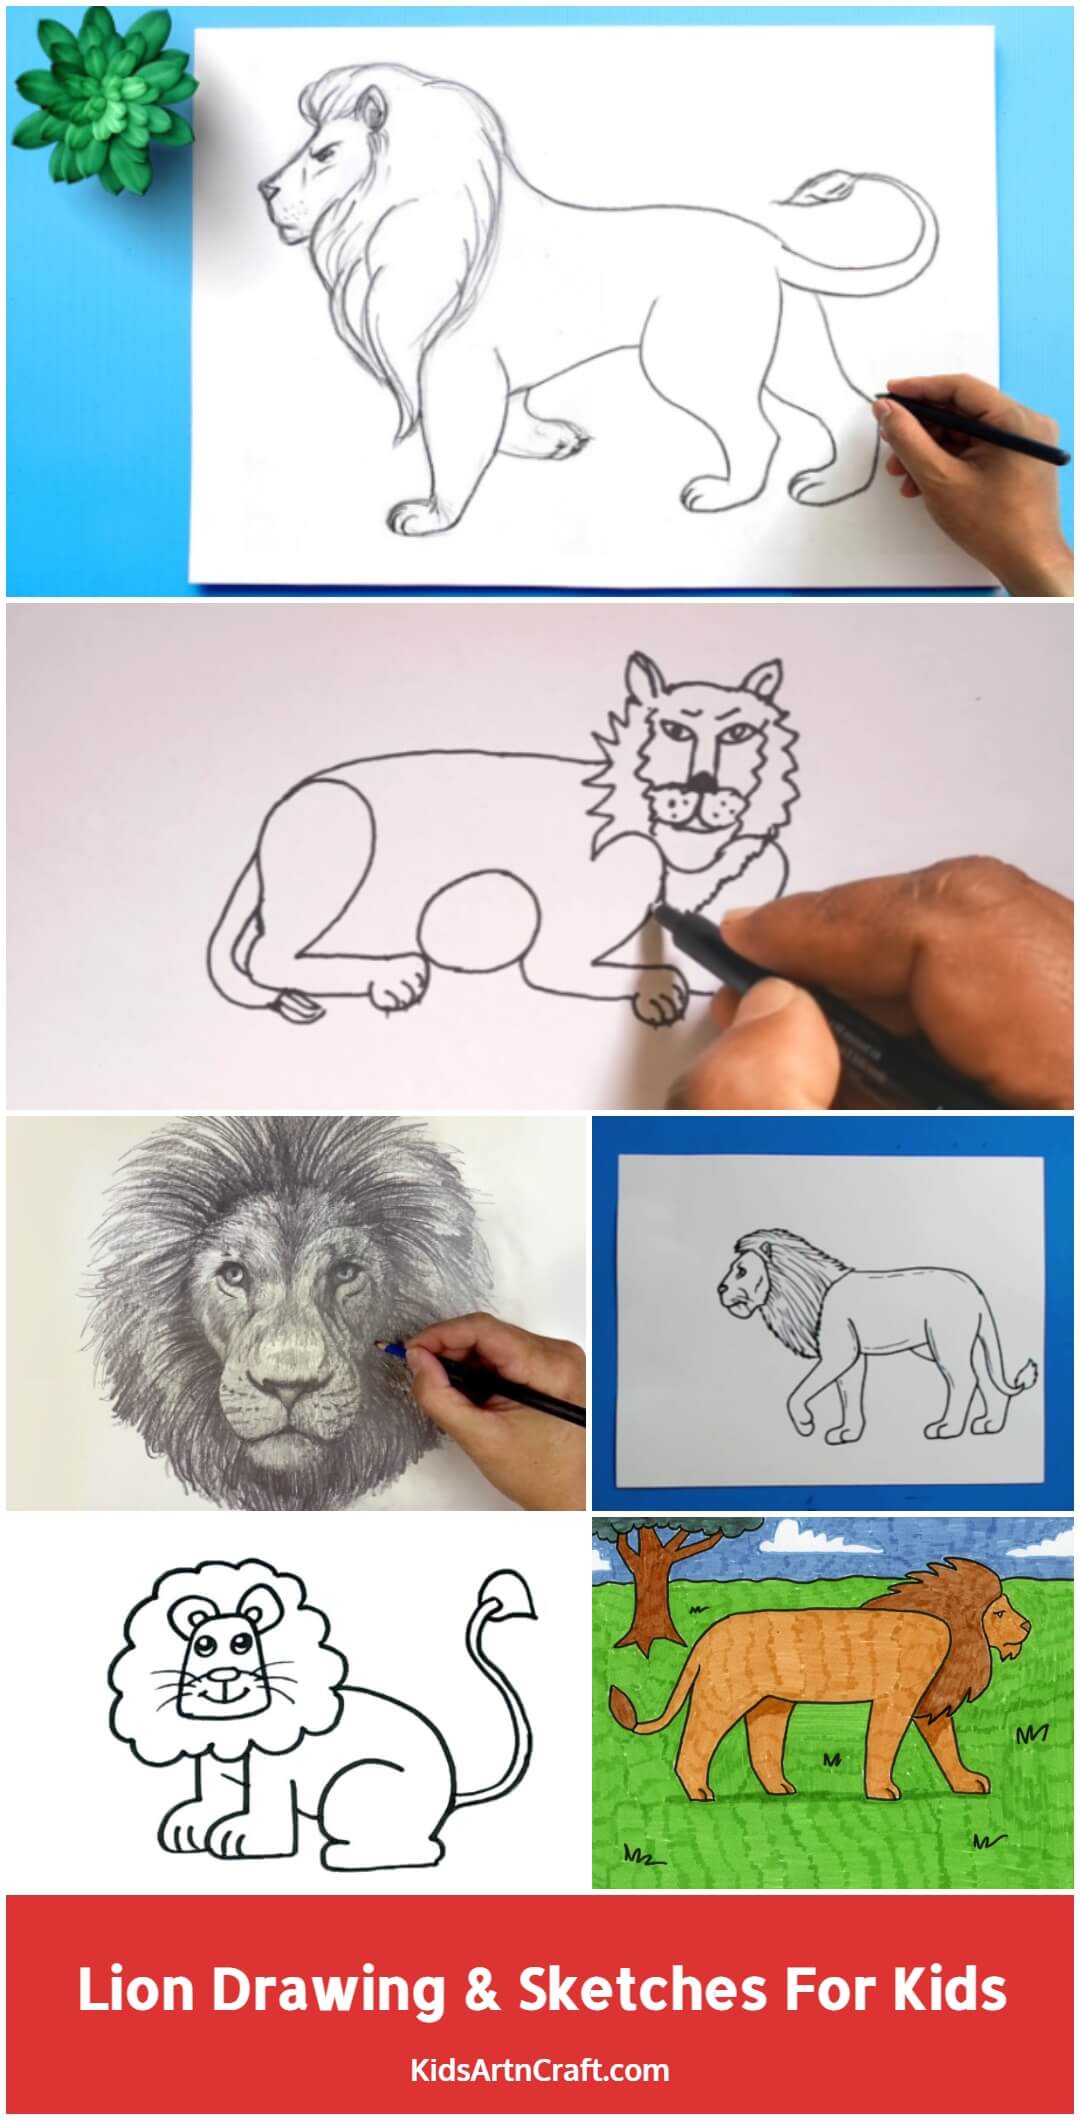 Lion Coloring and Drawing Book For Kids... by Books, Coloring-saigonsouth.com.vn